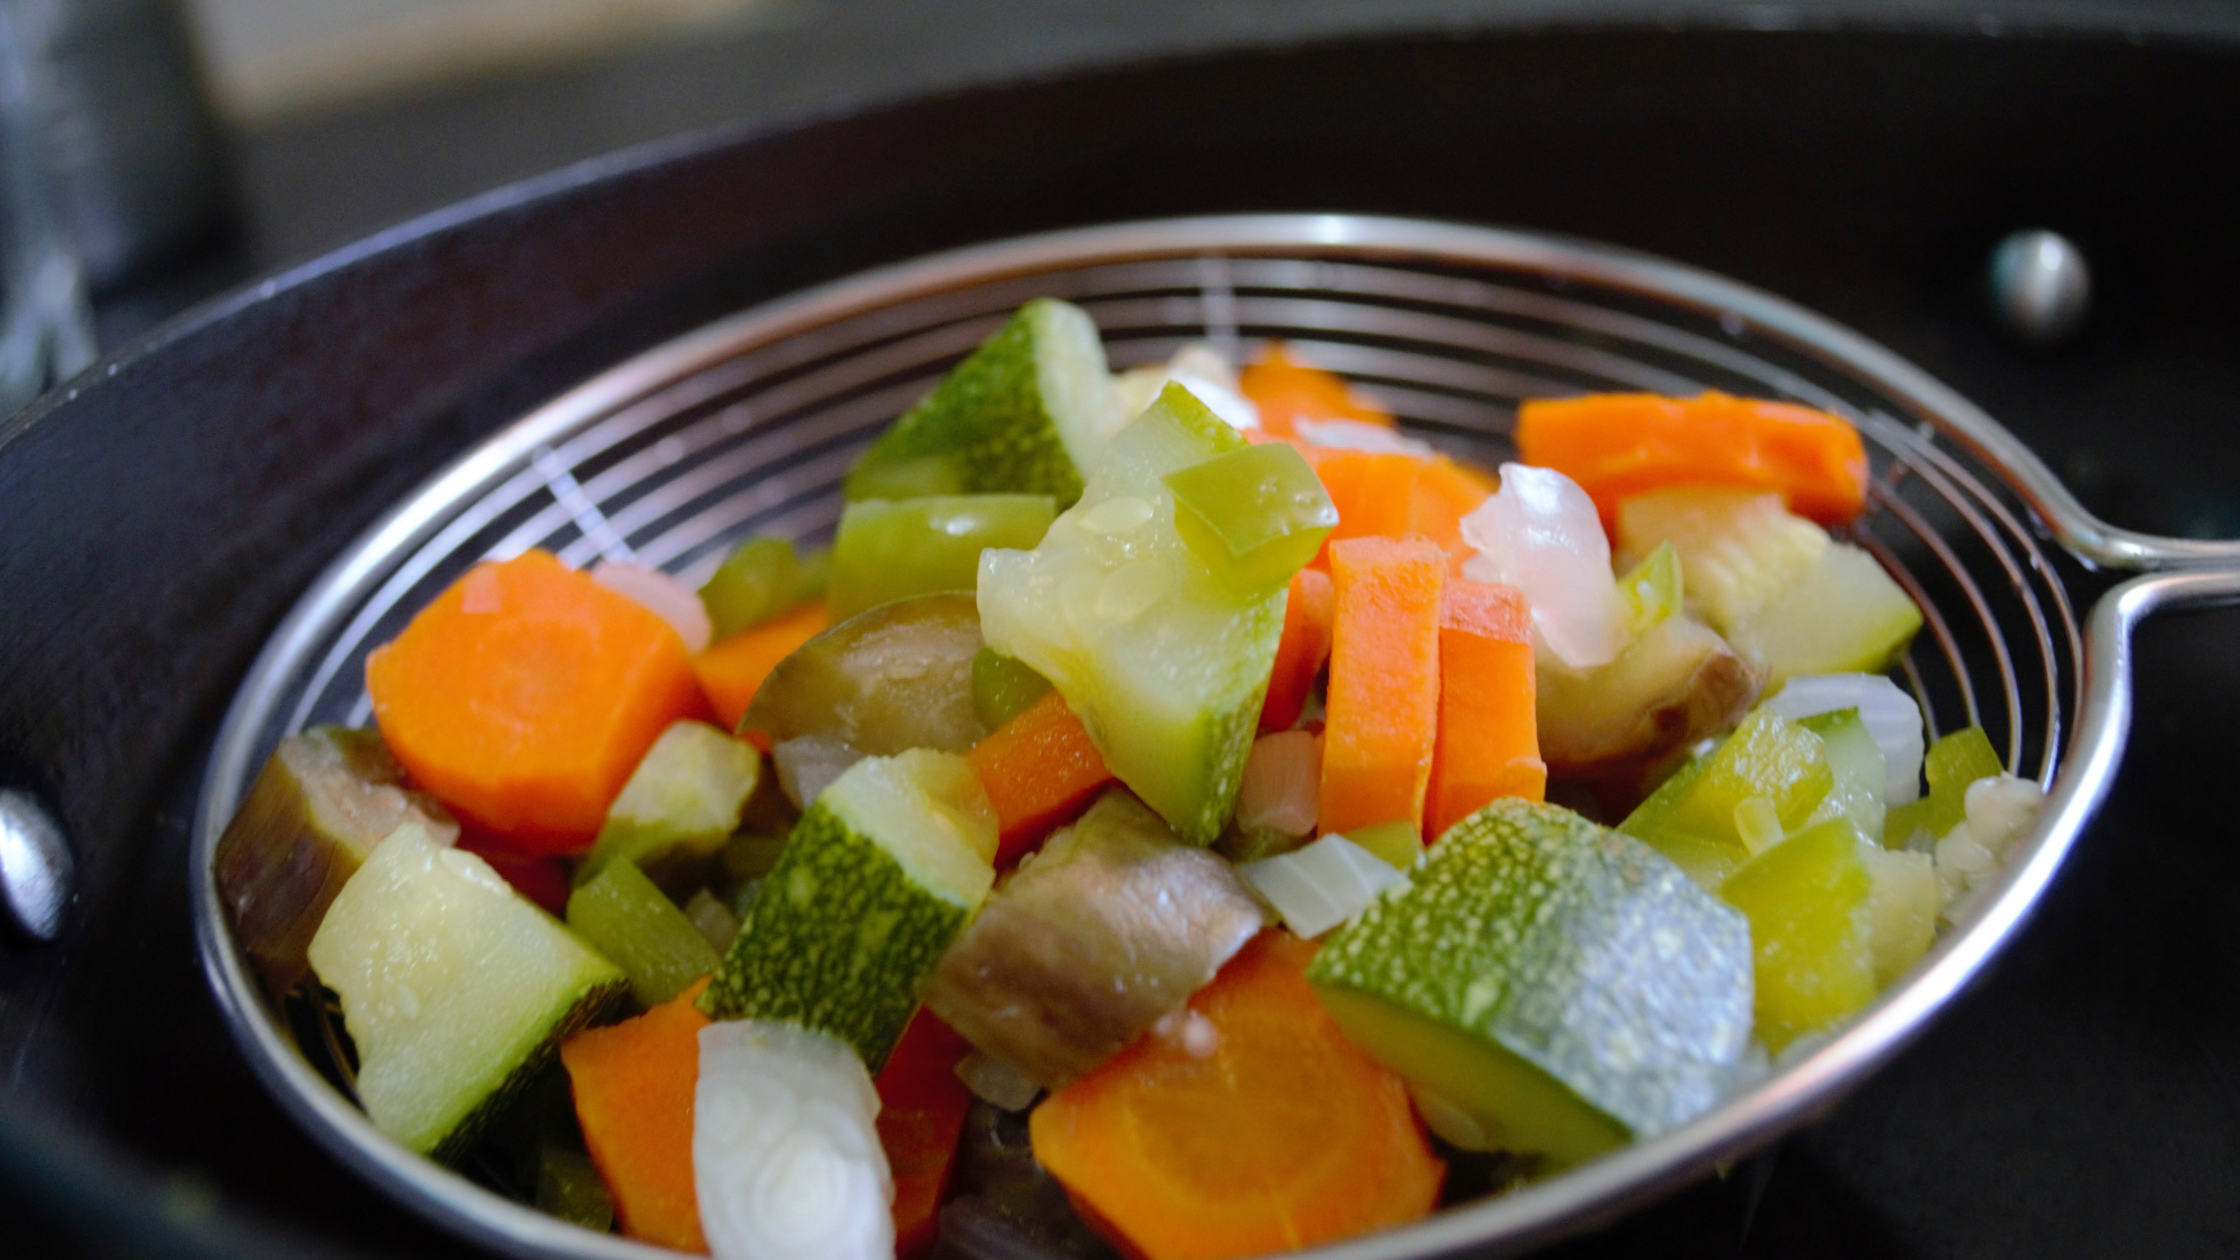 Steamed Mixed Vegetables